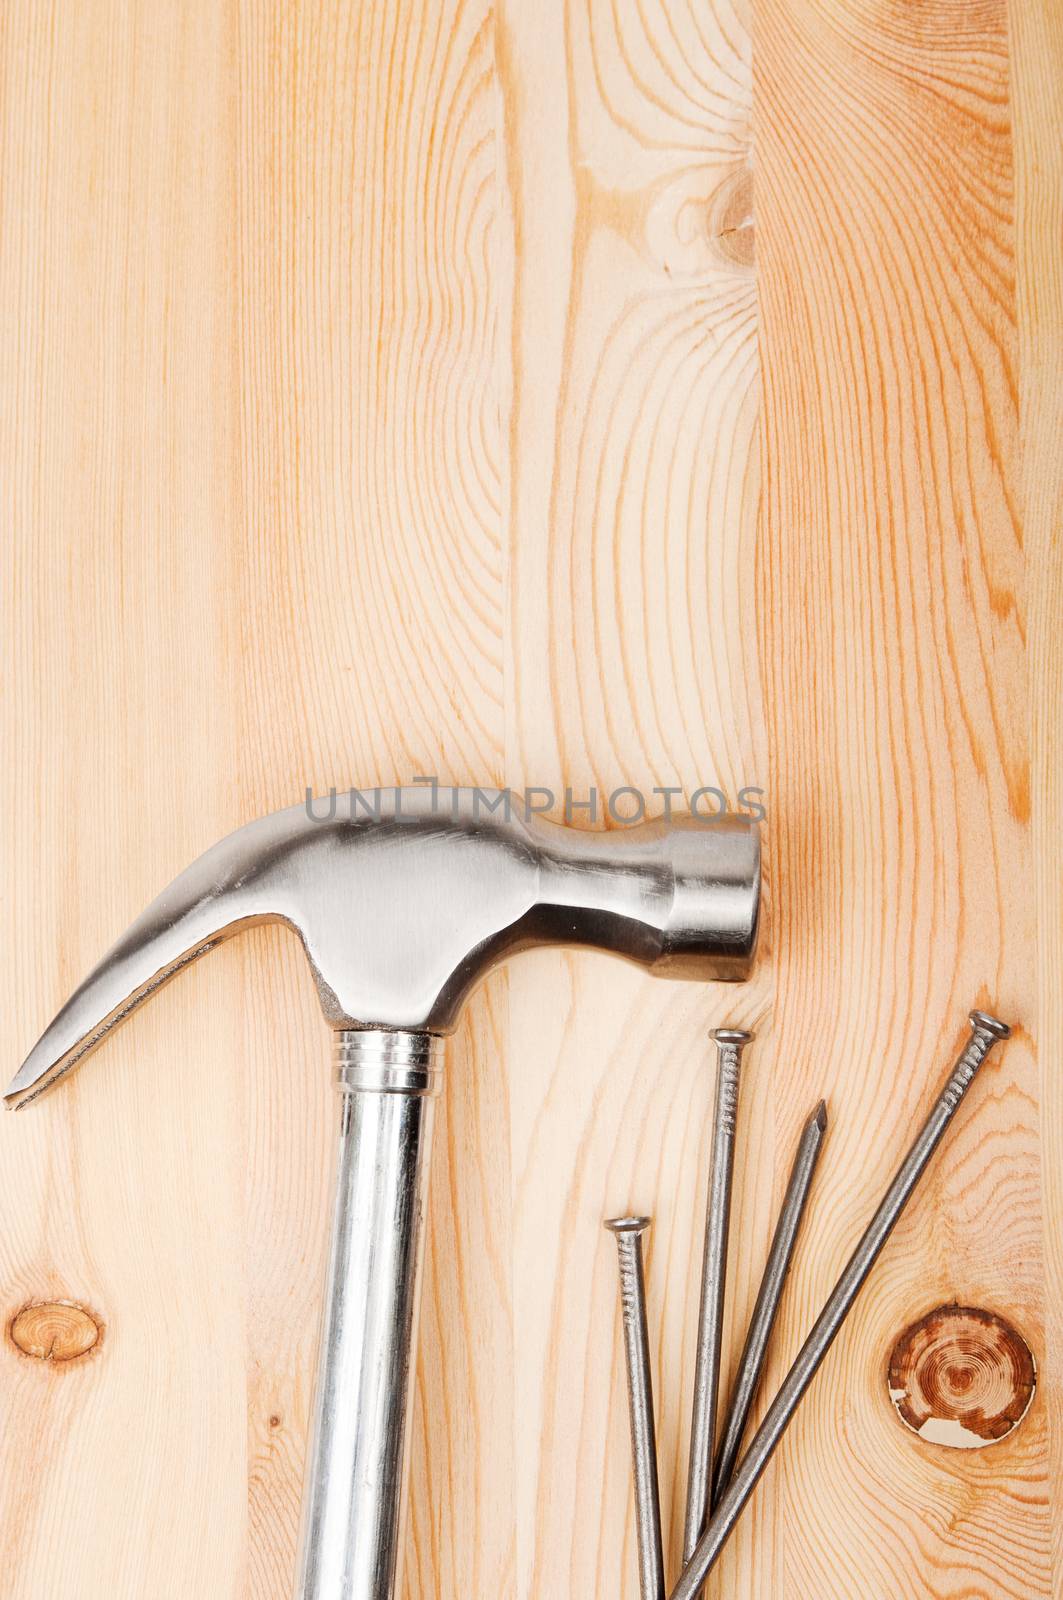 An image of Hammer with nails on wooden timber